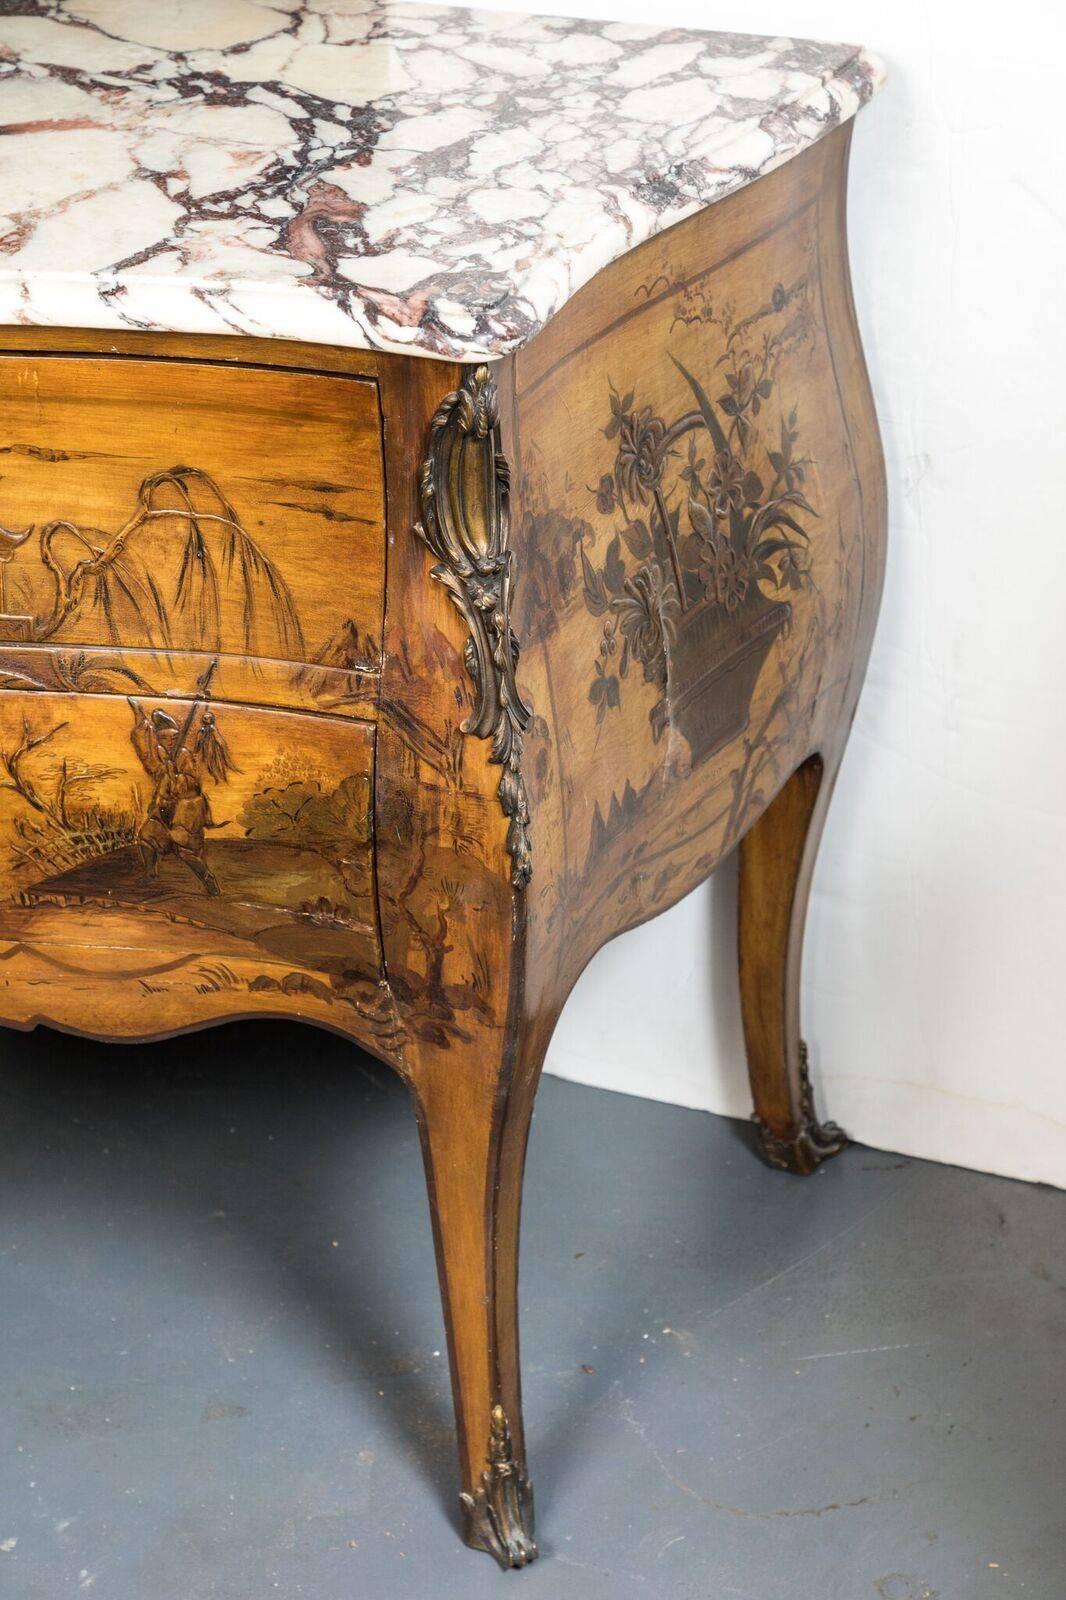 Remarkable pair of nearly identical, hand-painted and lacquered, saffron-hued, two-drawer, Bombay style marble-top commodes with ormolu mounts atop cabriole legs.